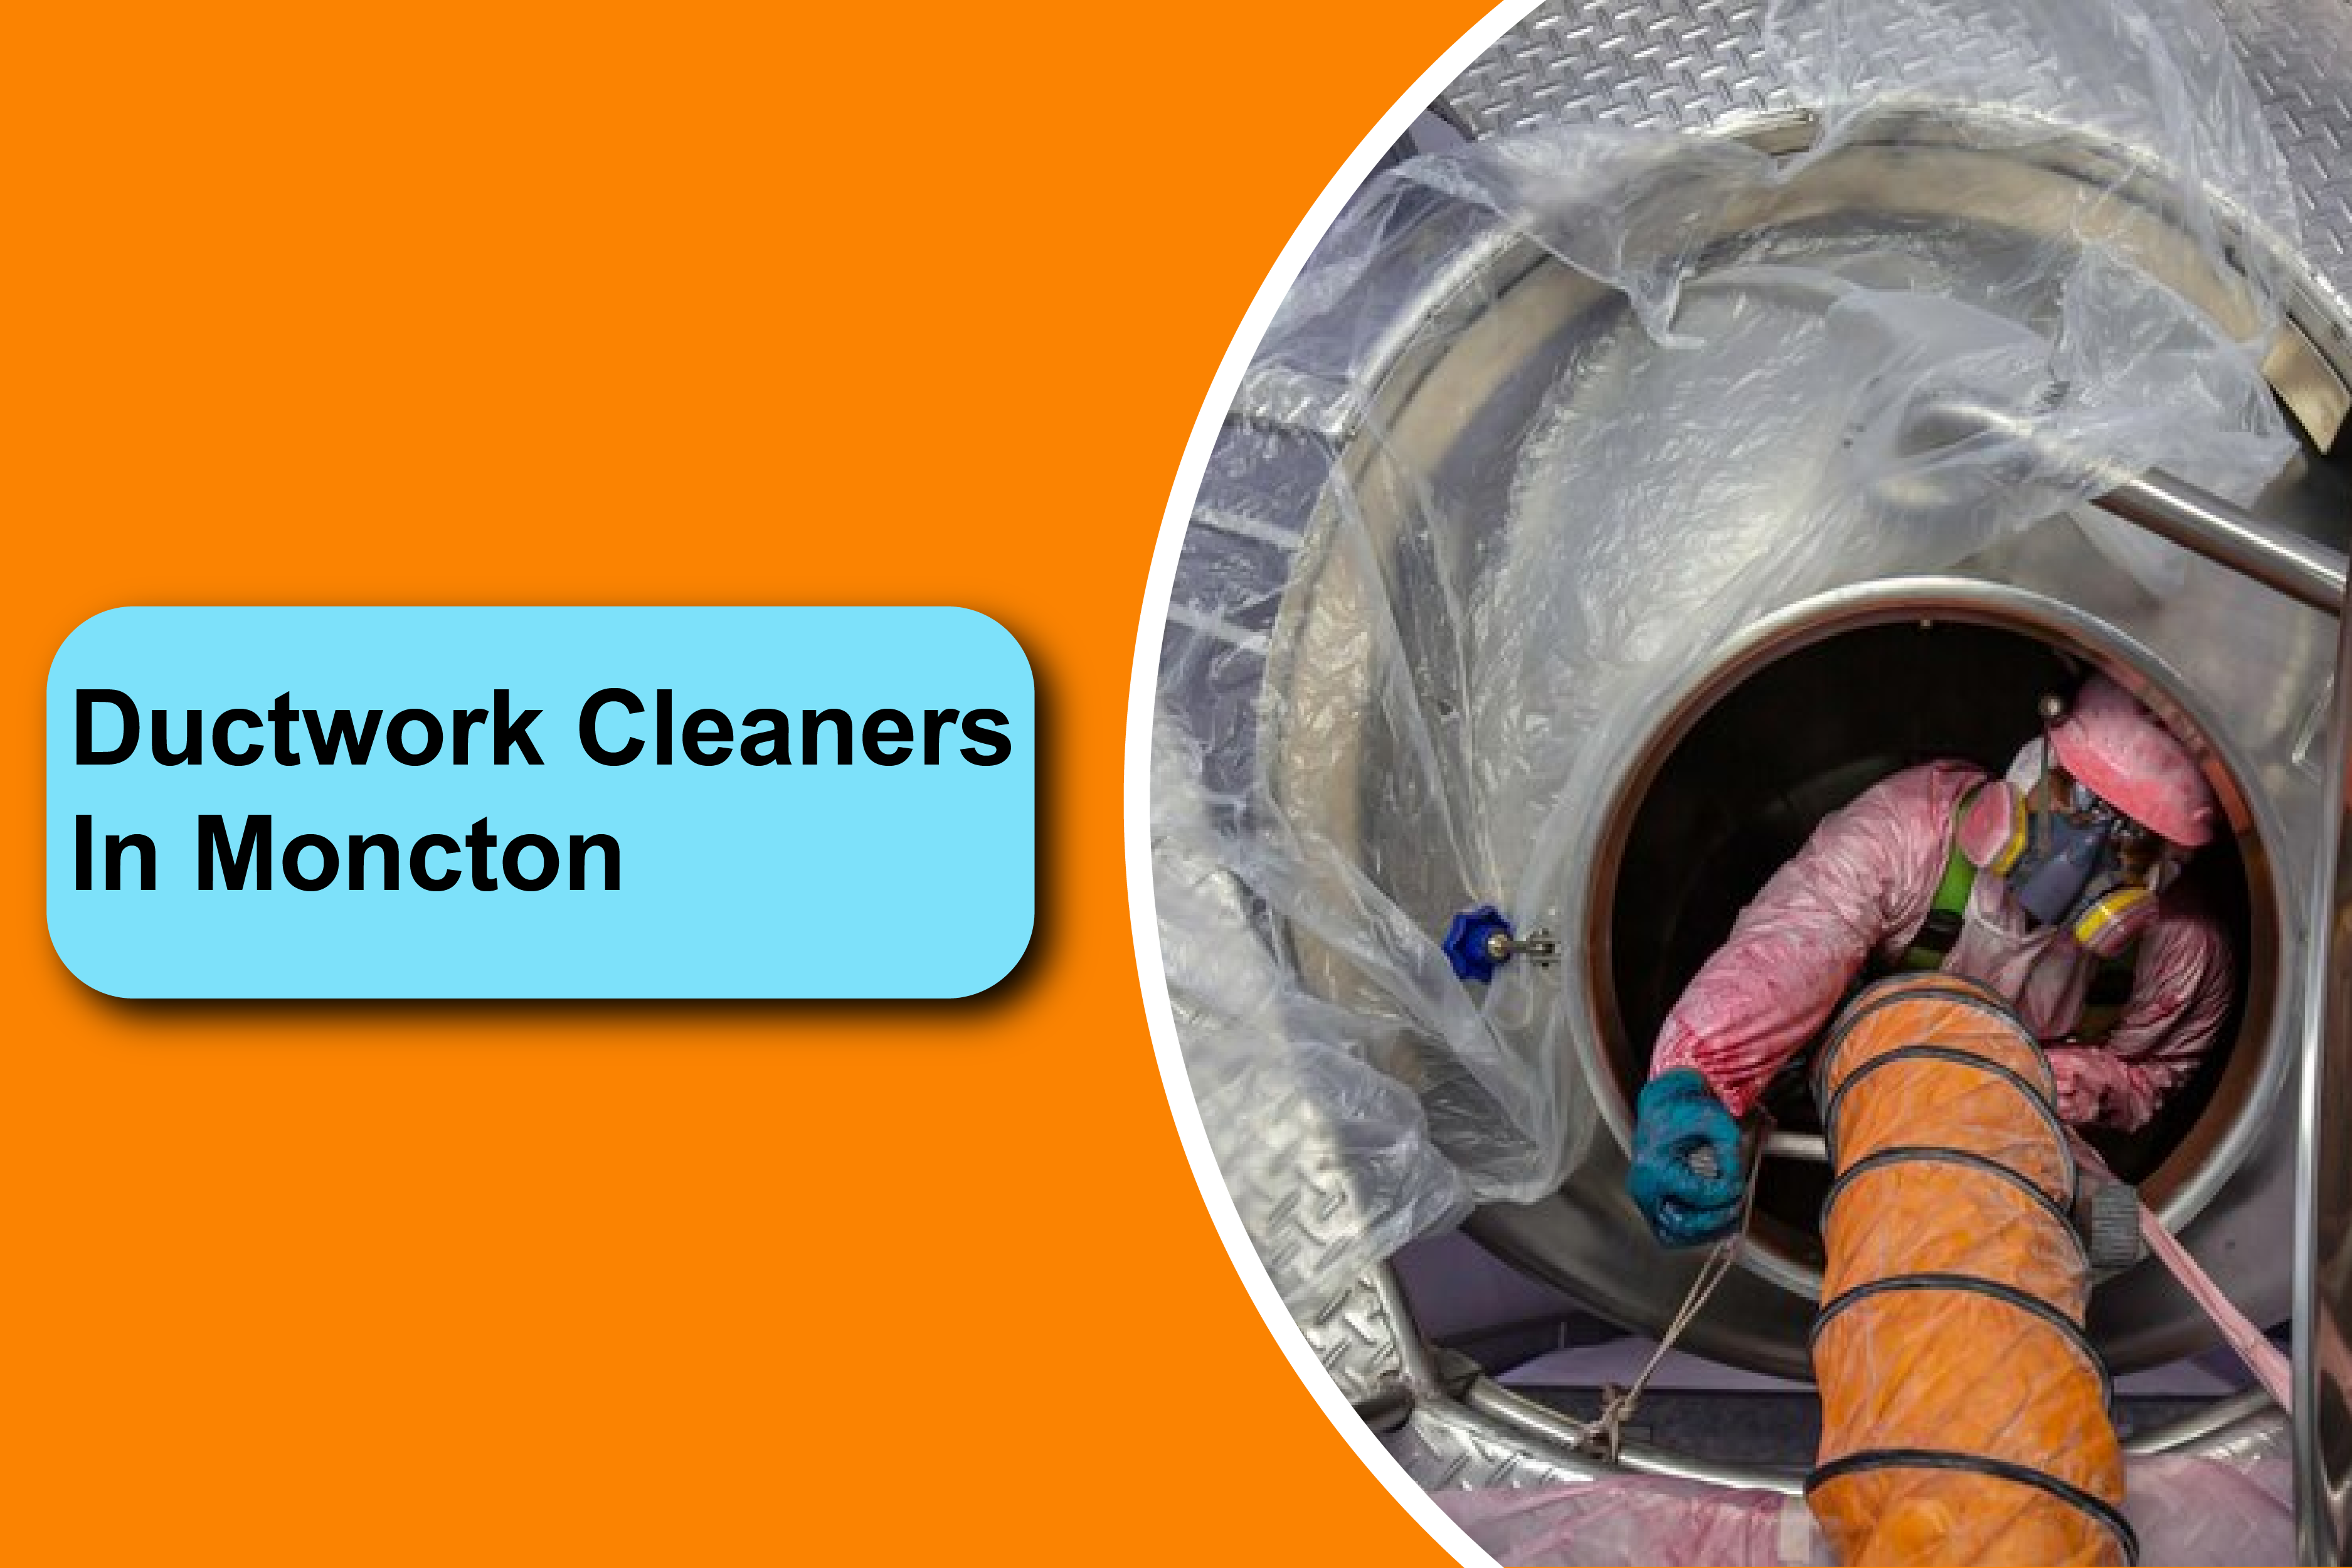 ductwork cleaners in Moncton